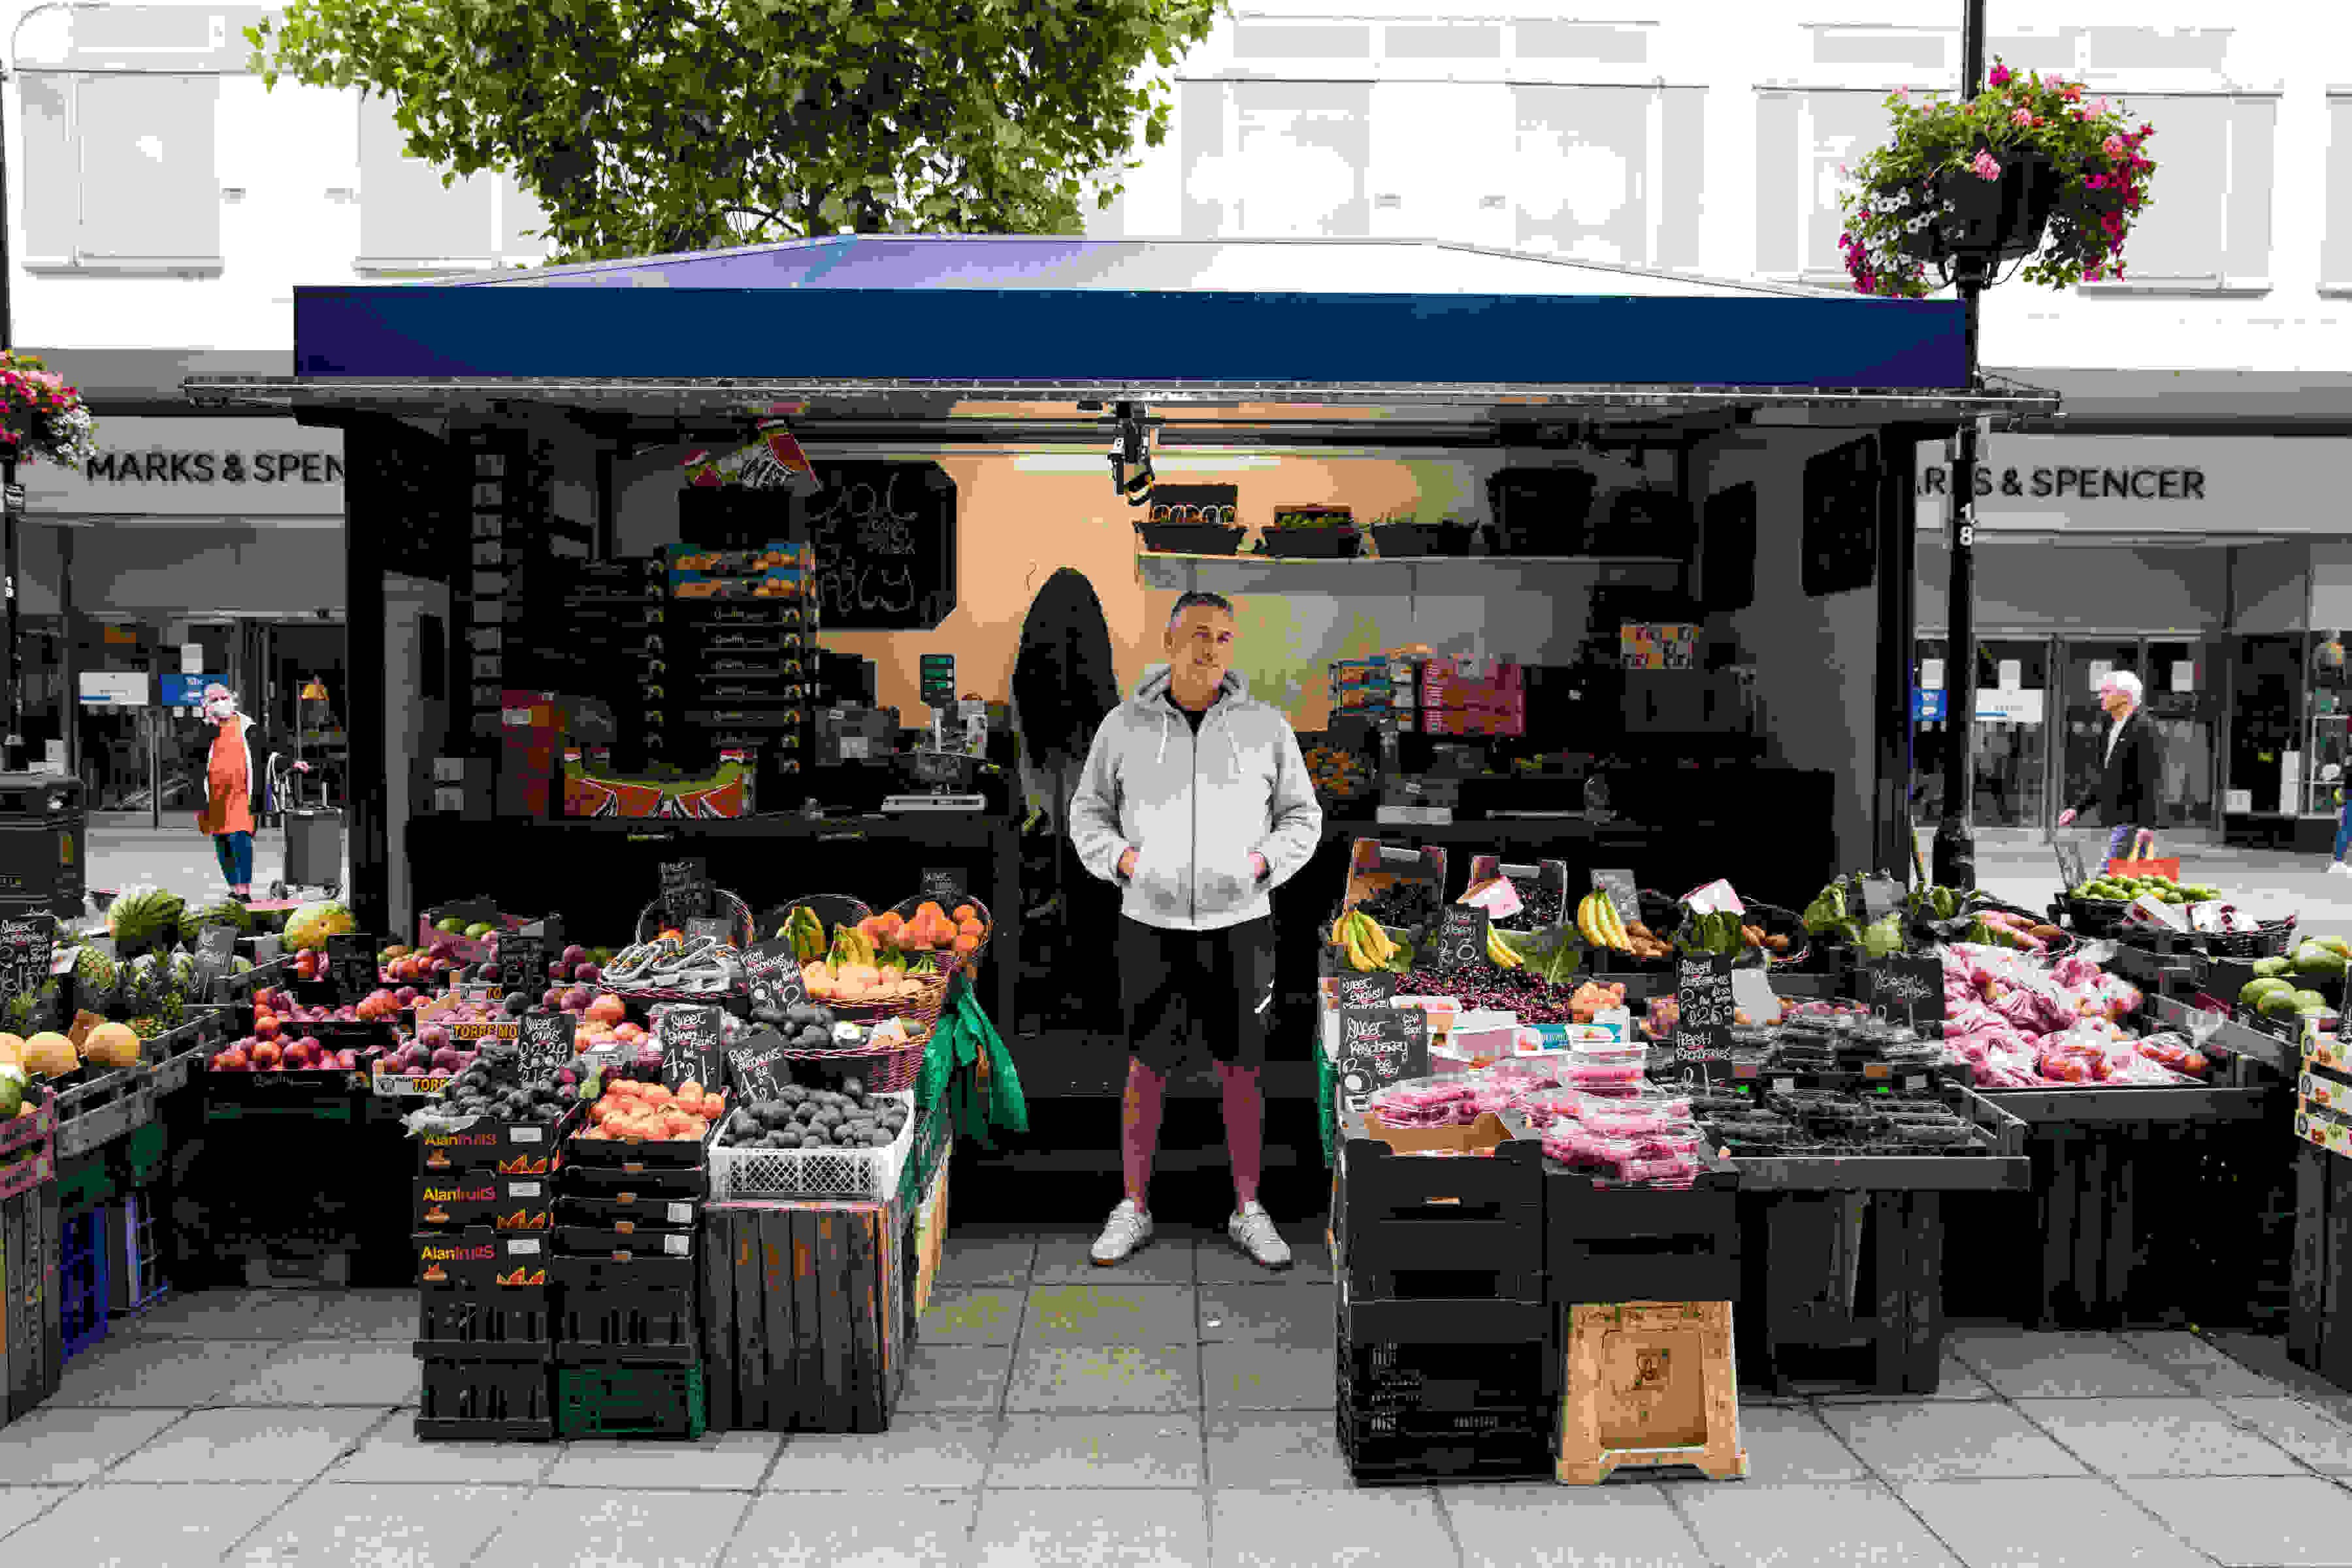 The Fruit and Veg Stall